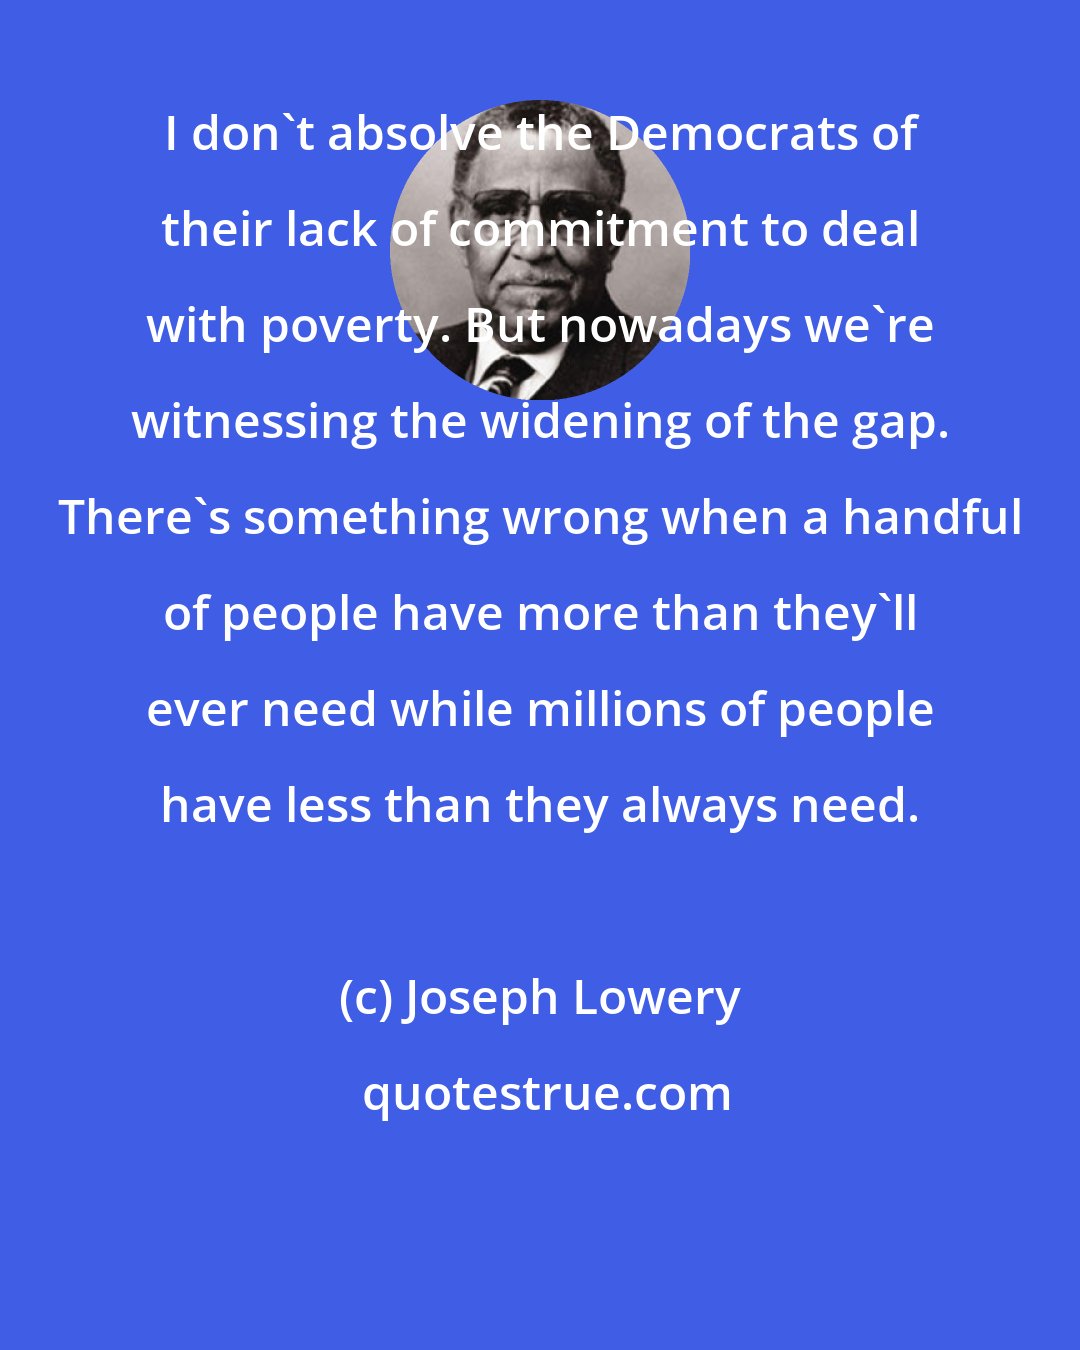 Joseph Lowery: I don't absolve the Democrats of their lack of commitment to deal with poverty. But nowadays we're witnessing the widening of the gap. There's something wrong when a handful of people have more than they'll ever need while millions of people have less than they always need.